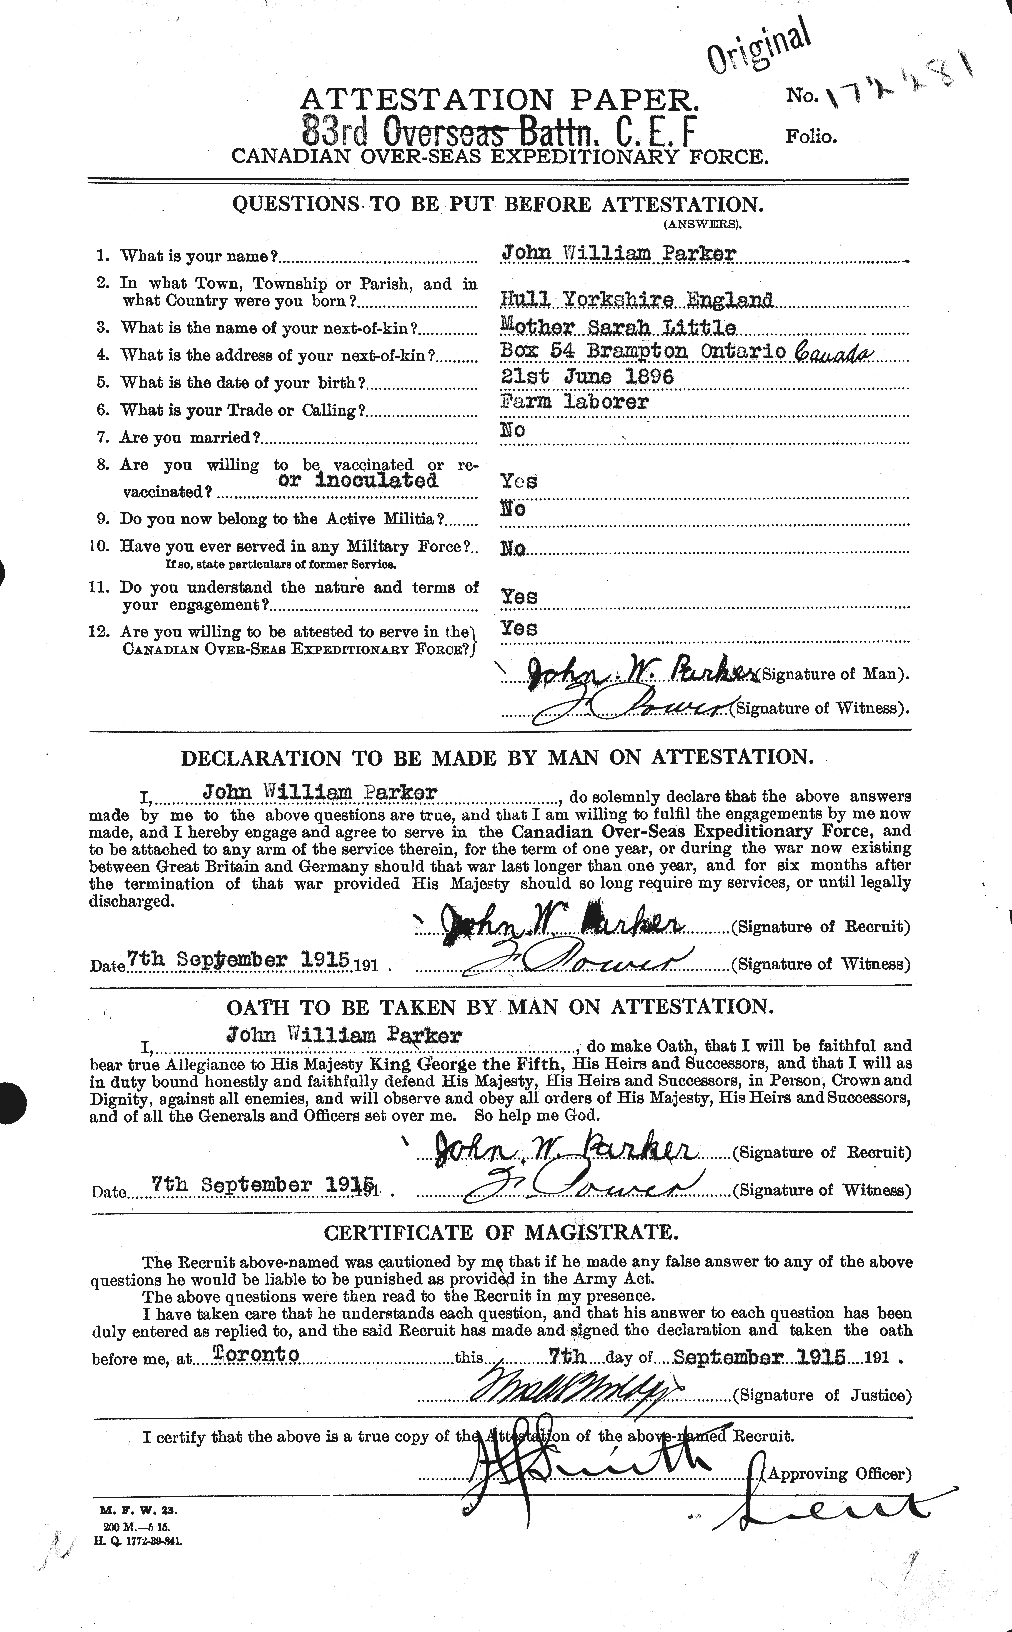 Personnel Records of the First World War - CEF 565495a